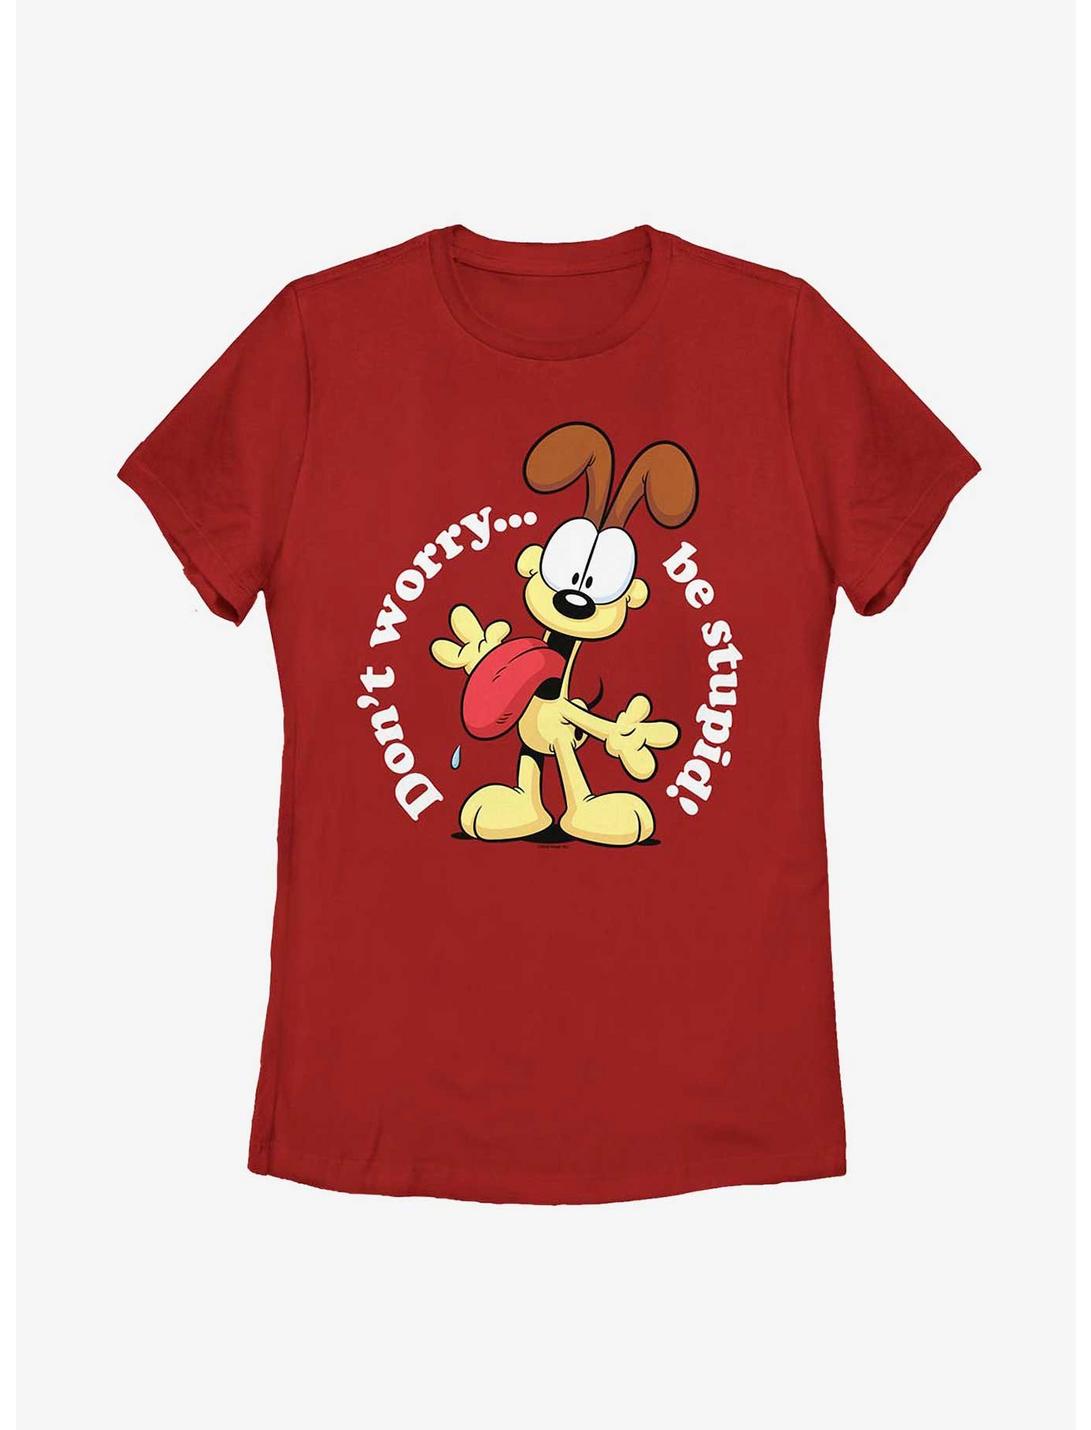 Garfield Odie Be Stupid Women's T-Shirt, RED, hi-res